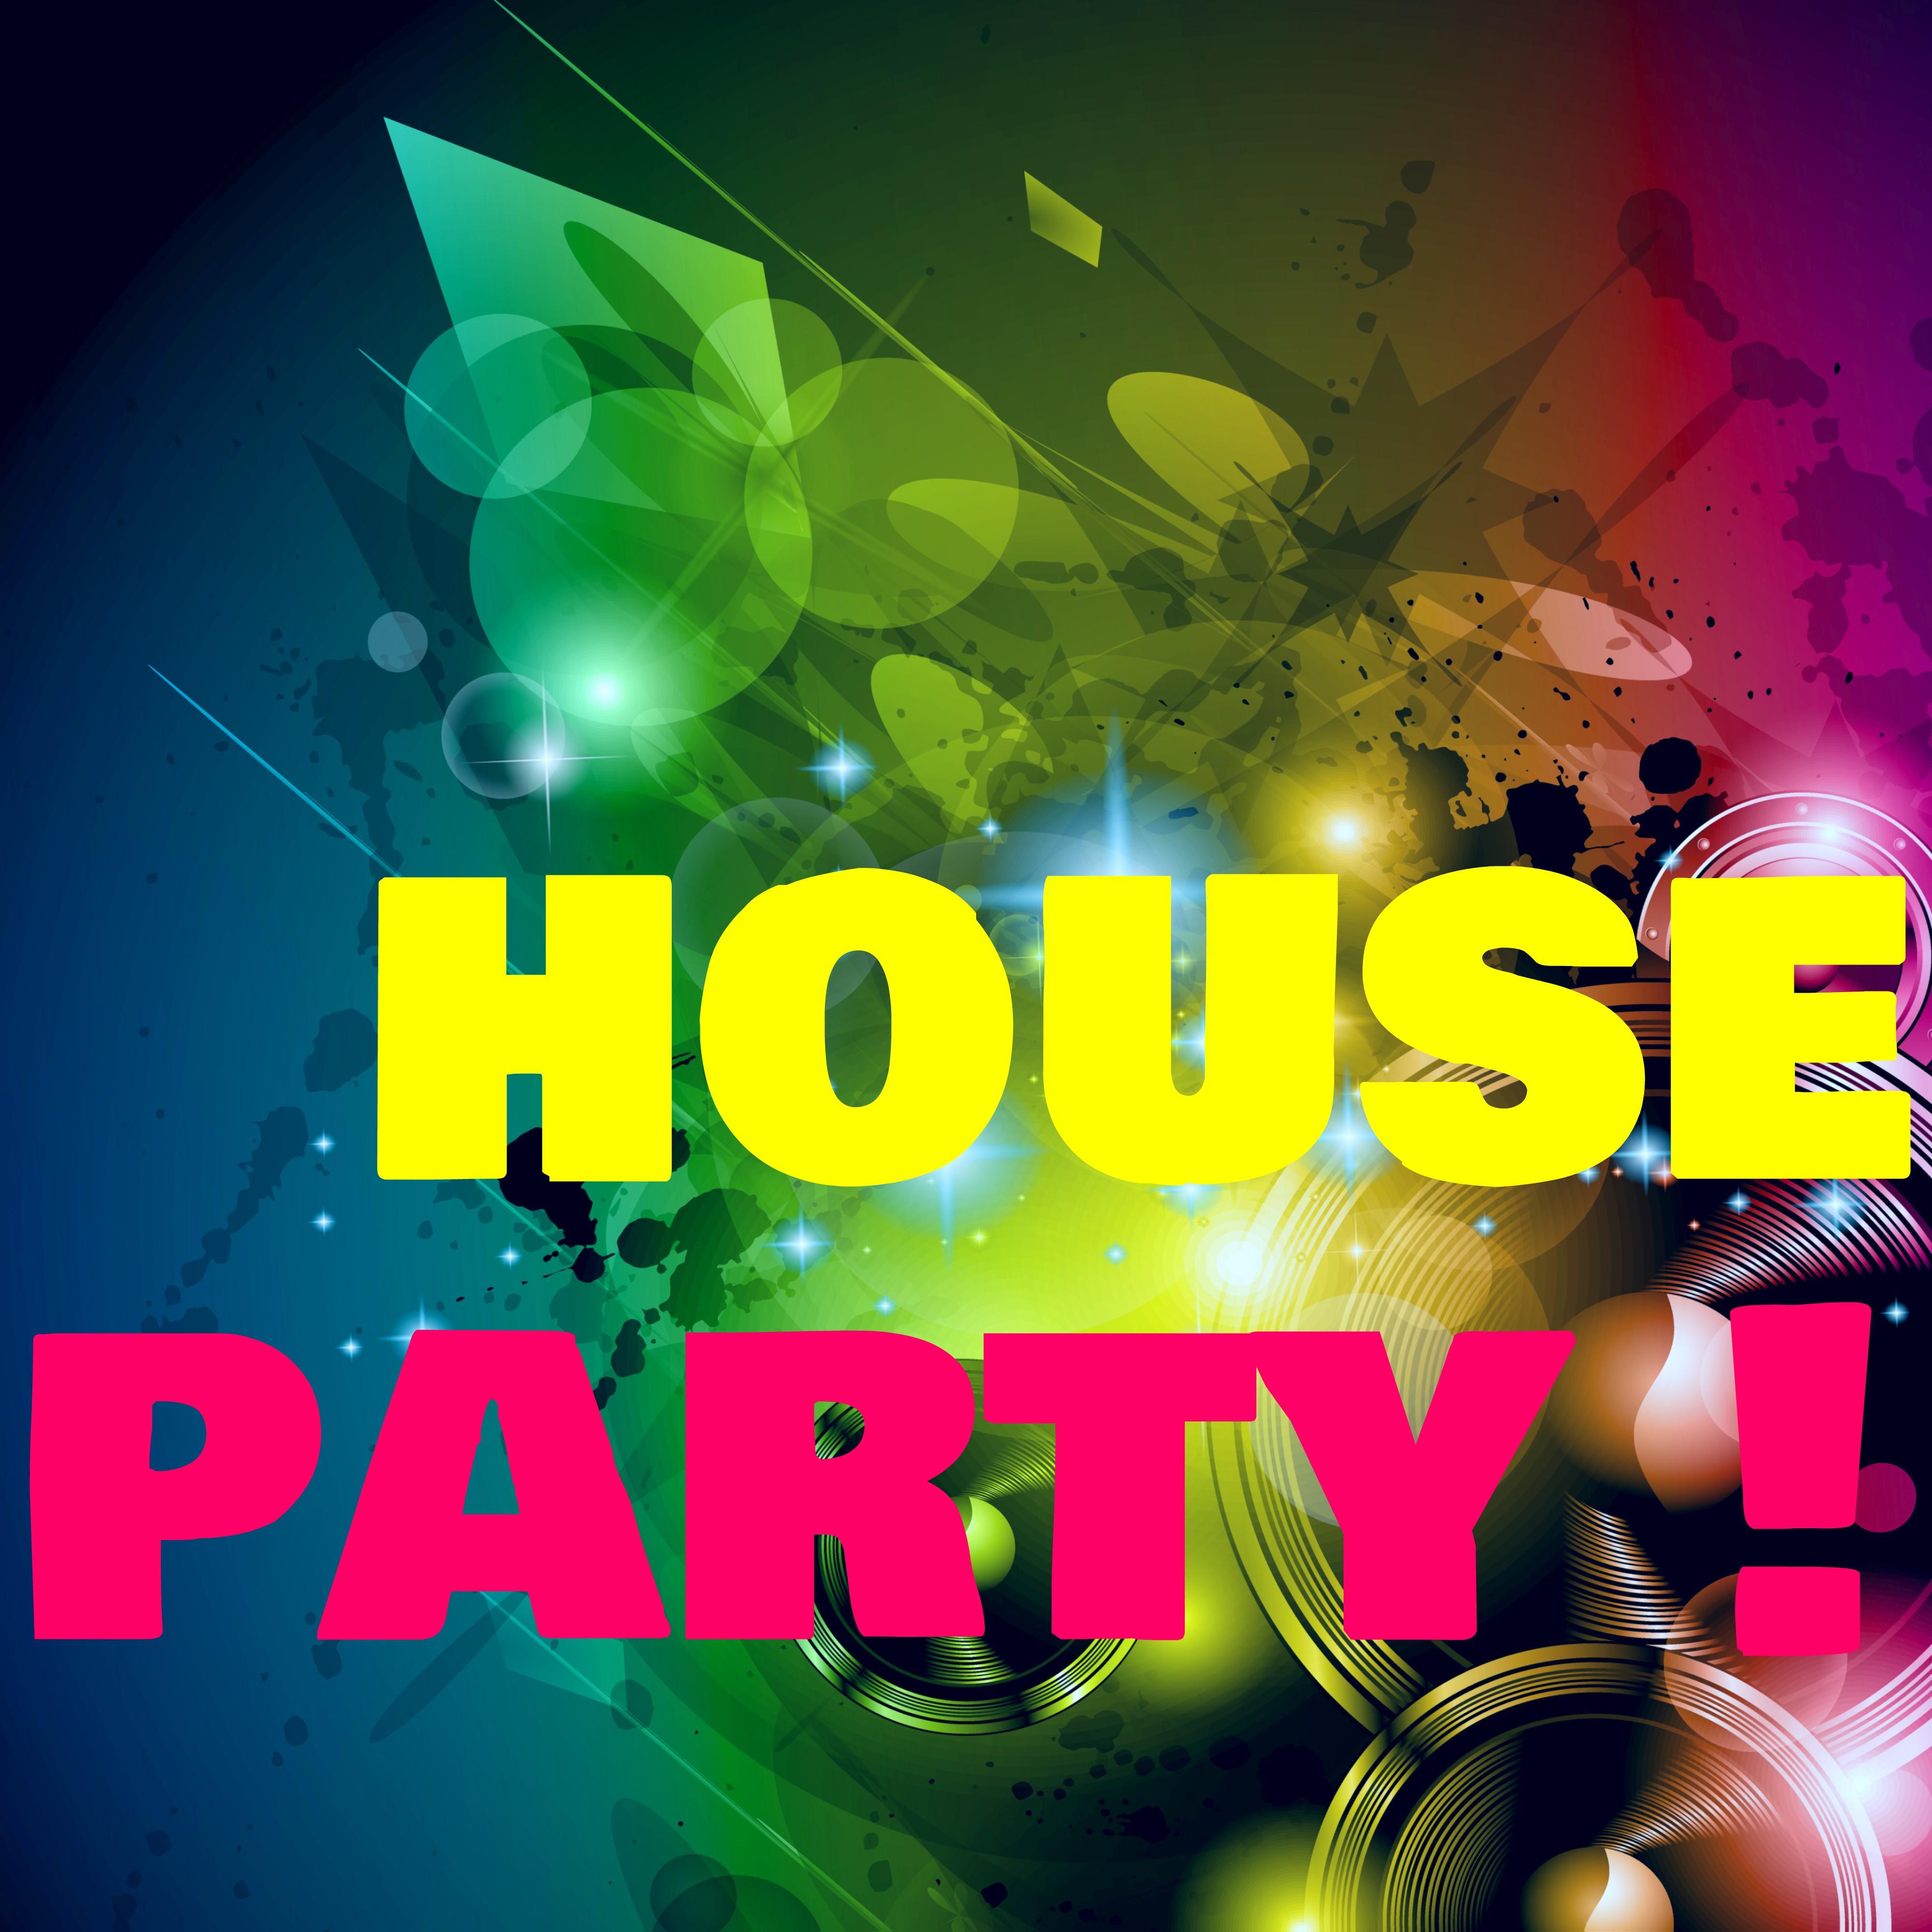 House Party - Best of Tropical House Music for Funny Party Night, Cocktail Lounge Session & Life